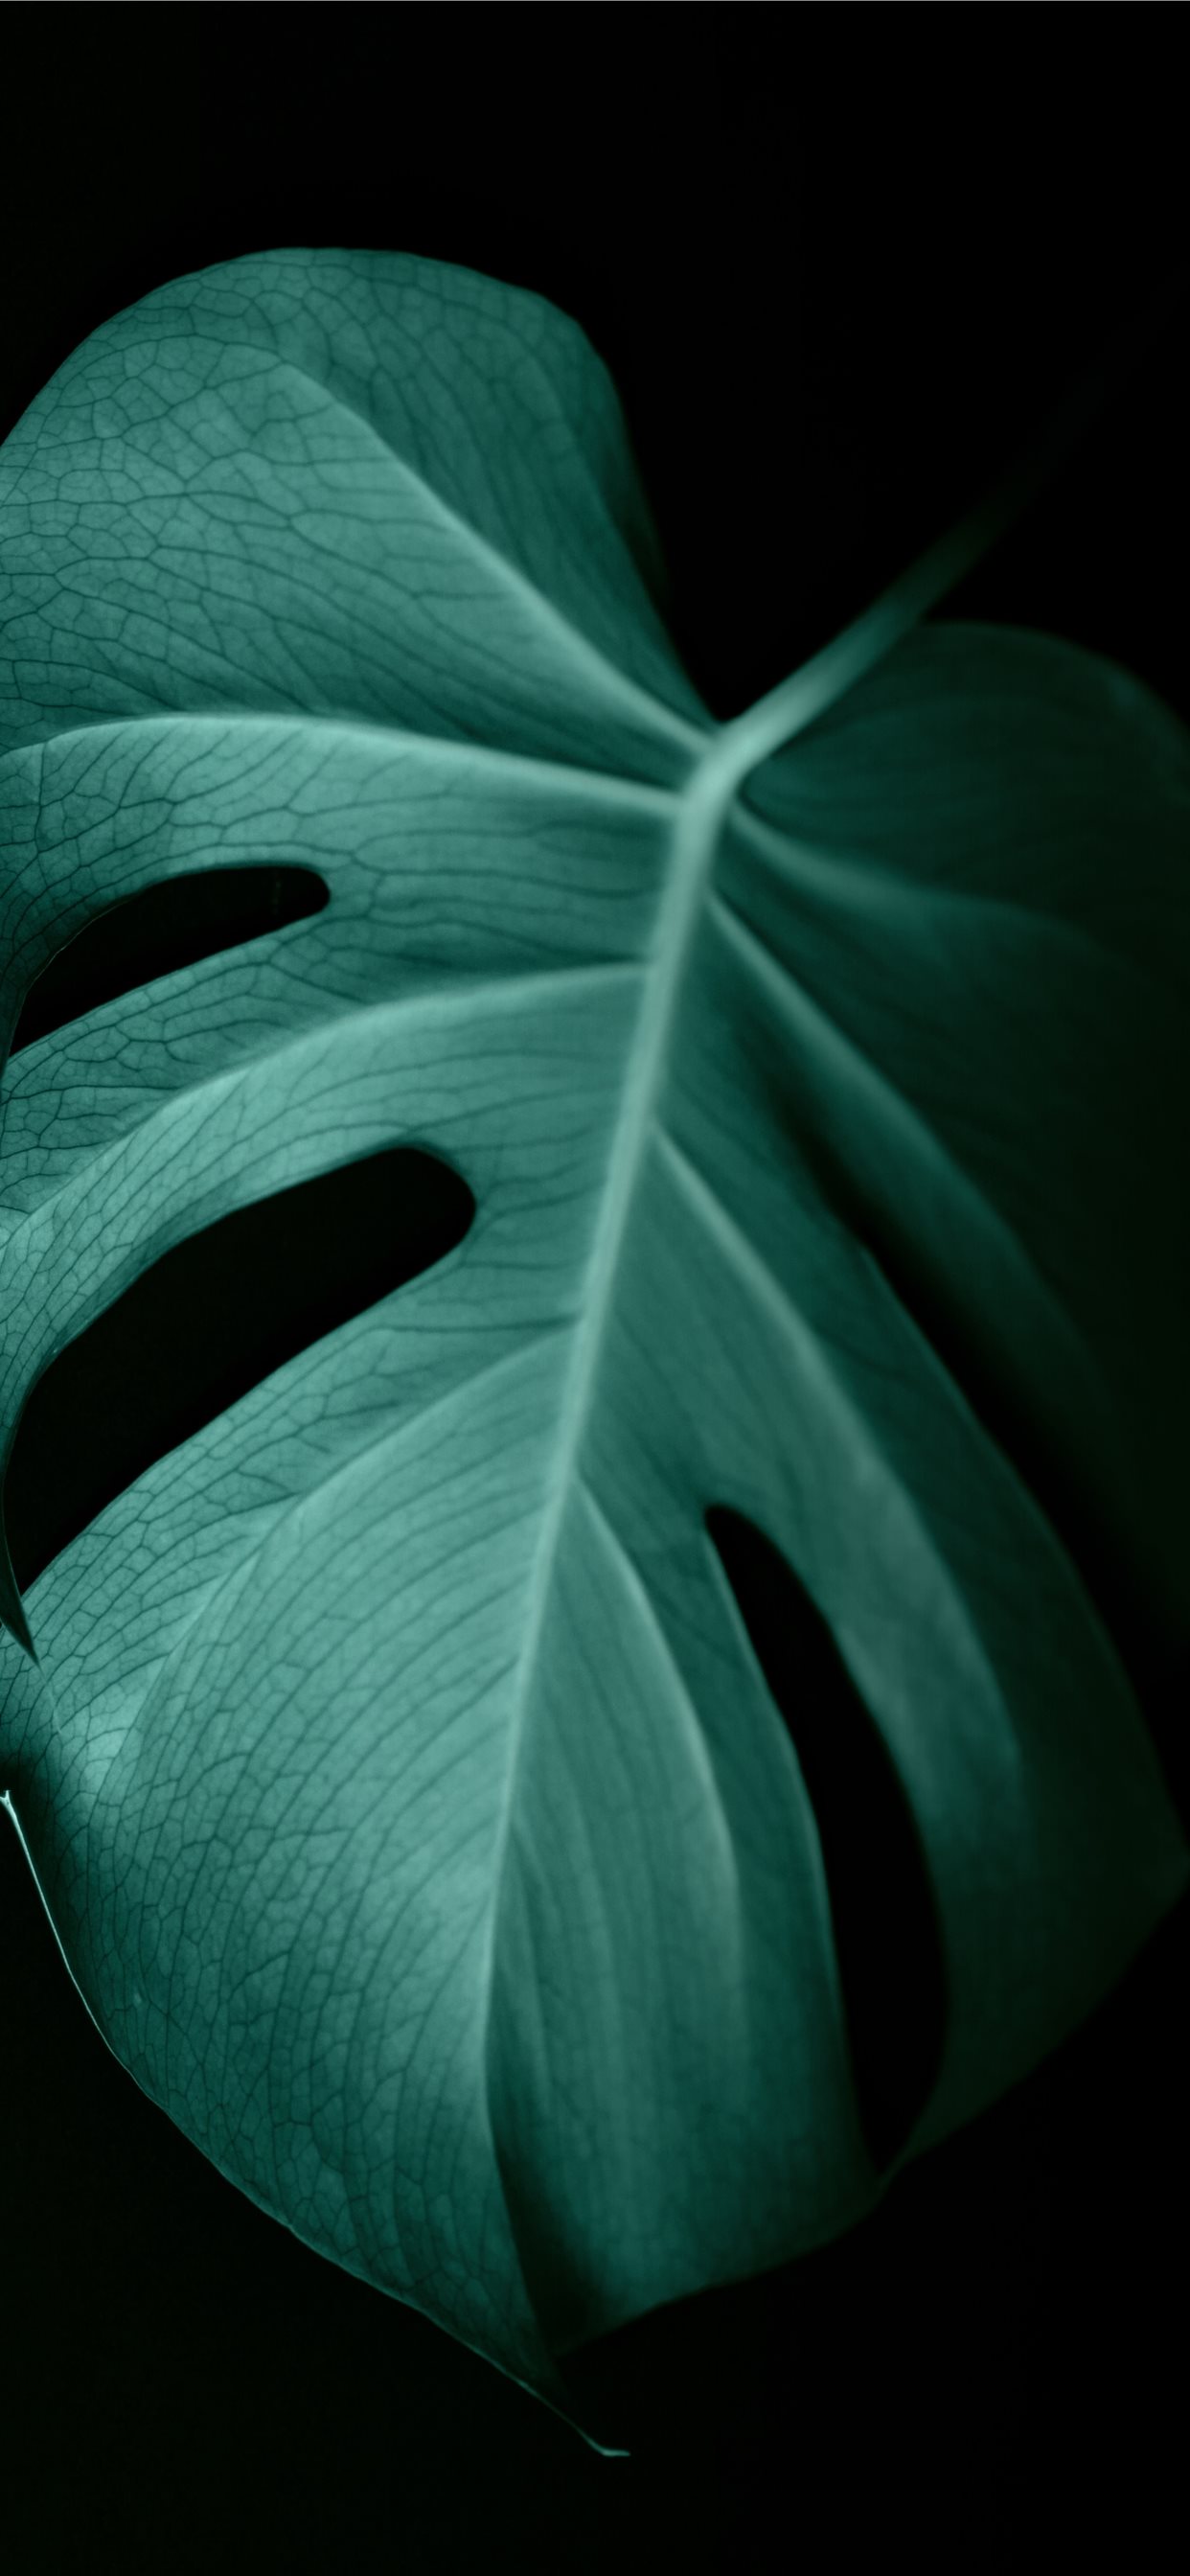 green leaf in dark surface iPhone X Wallpapers Free Download